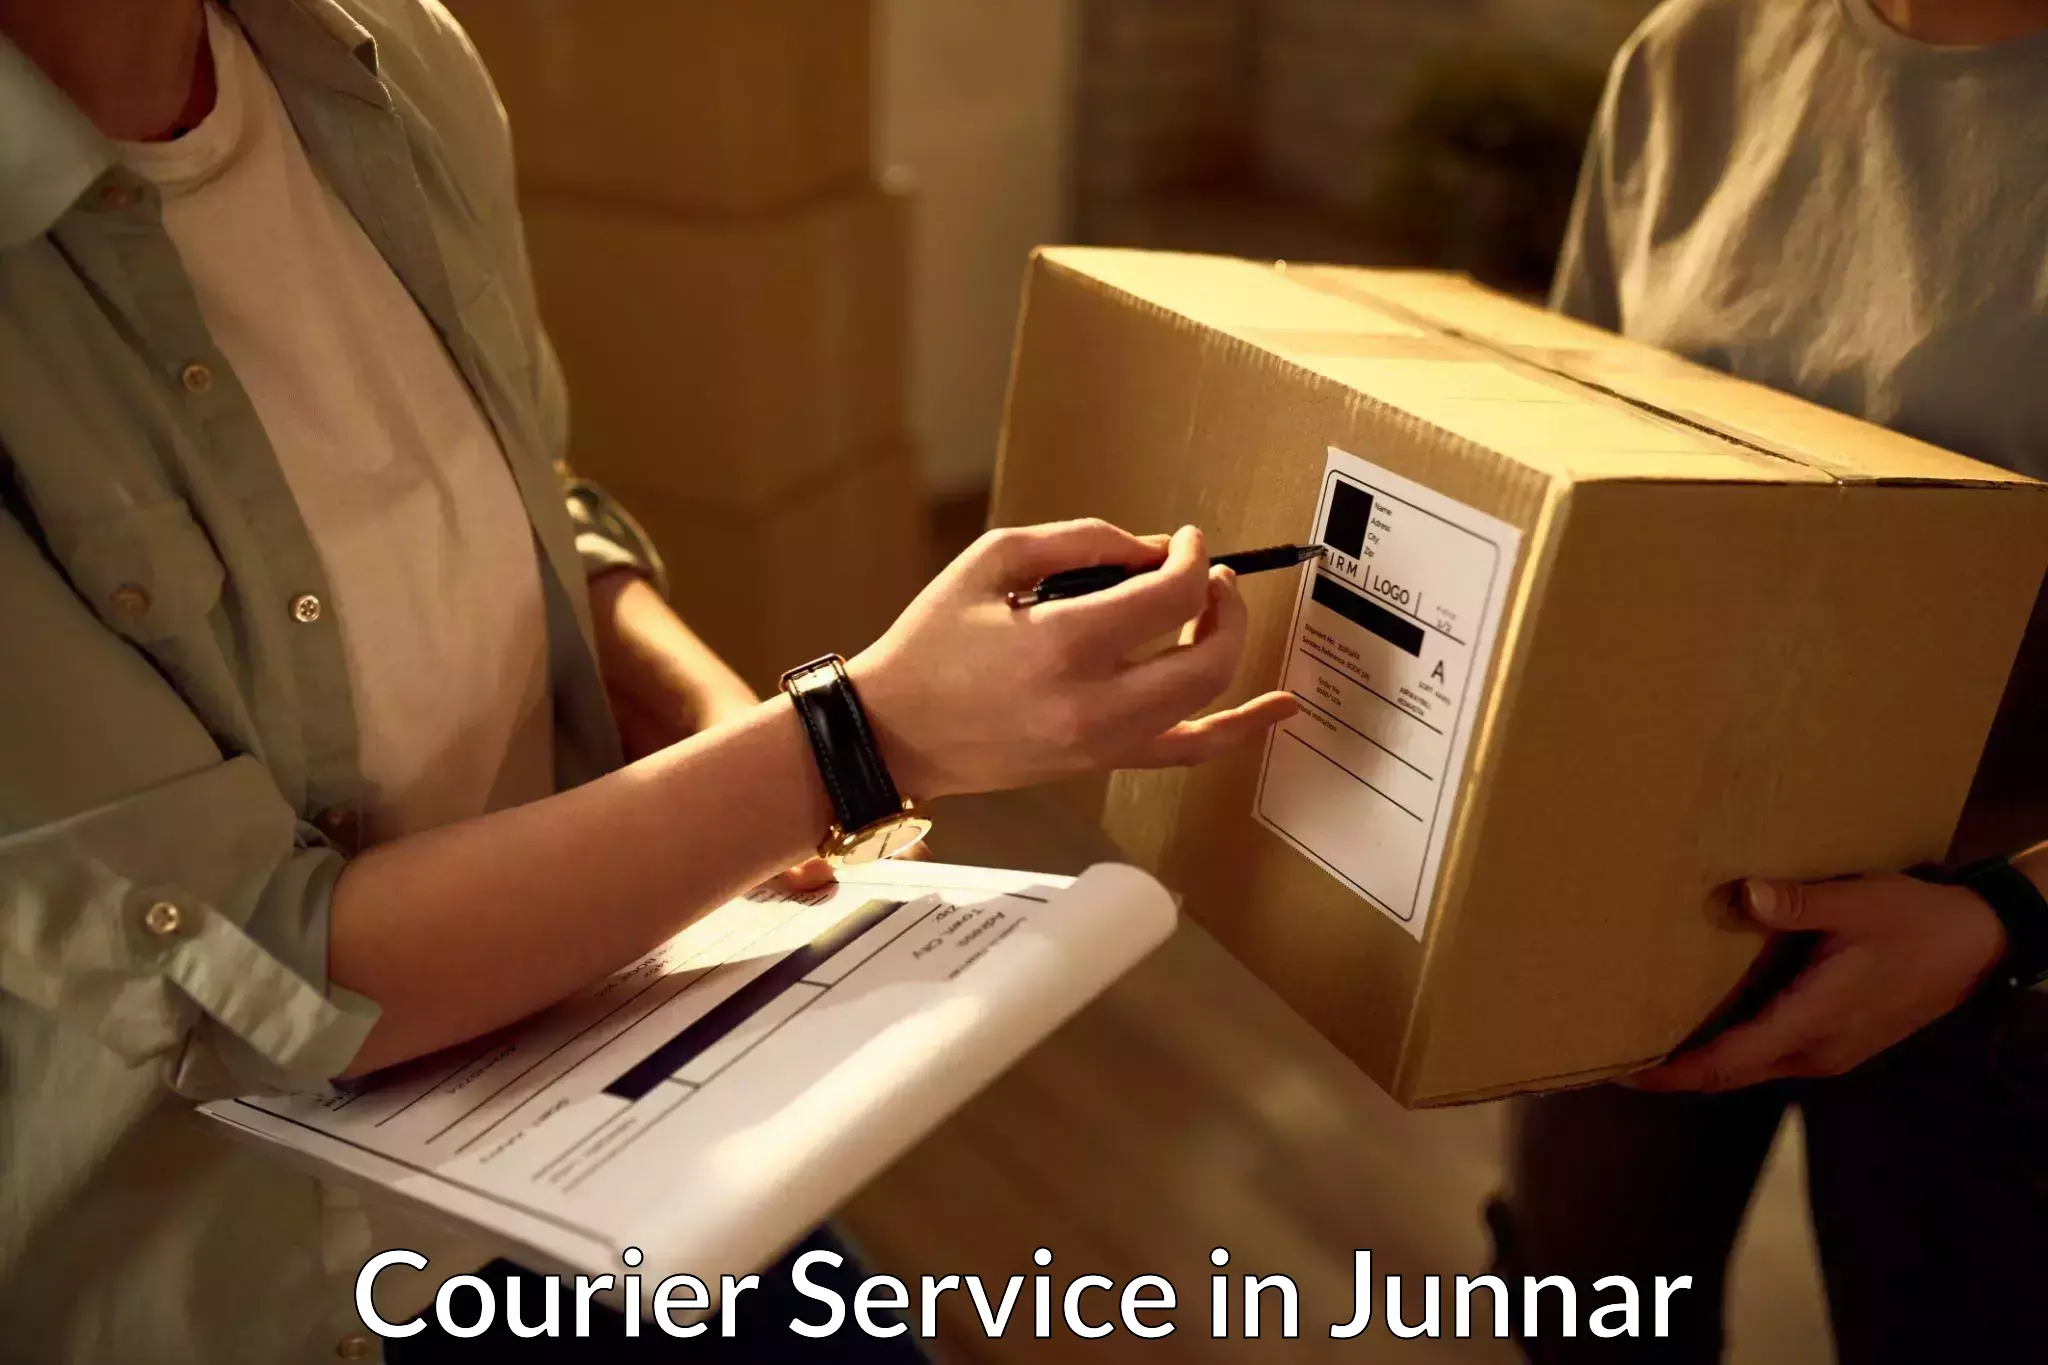 Personal parcel delivery in Junnar